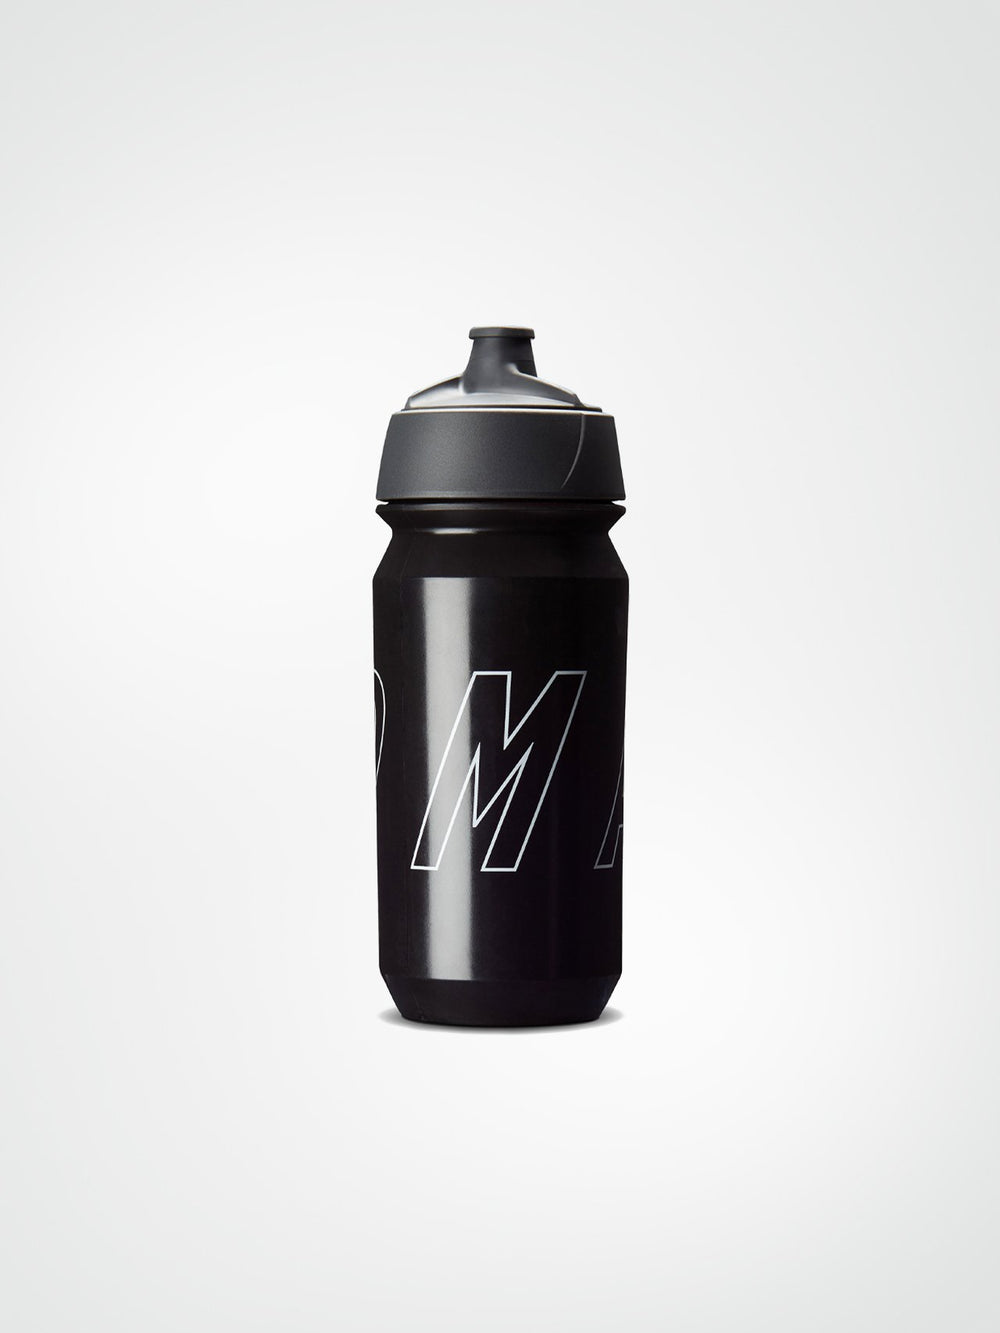 Product Image for Outline Bottle